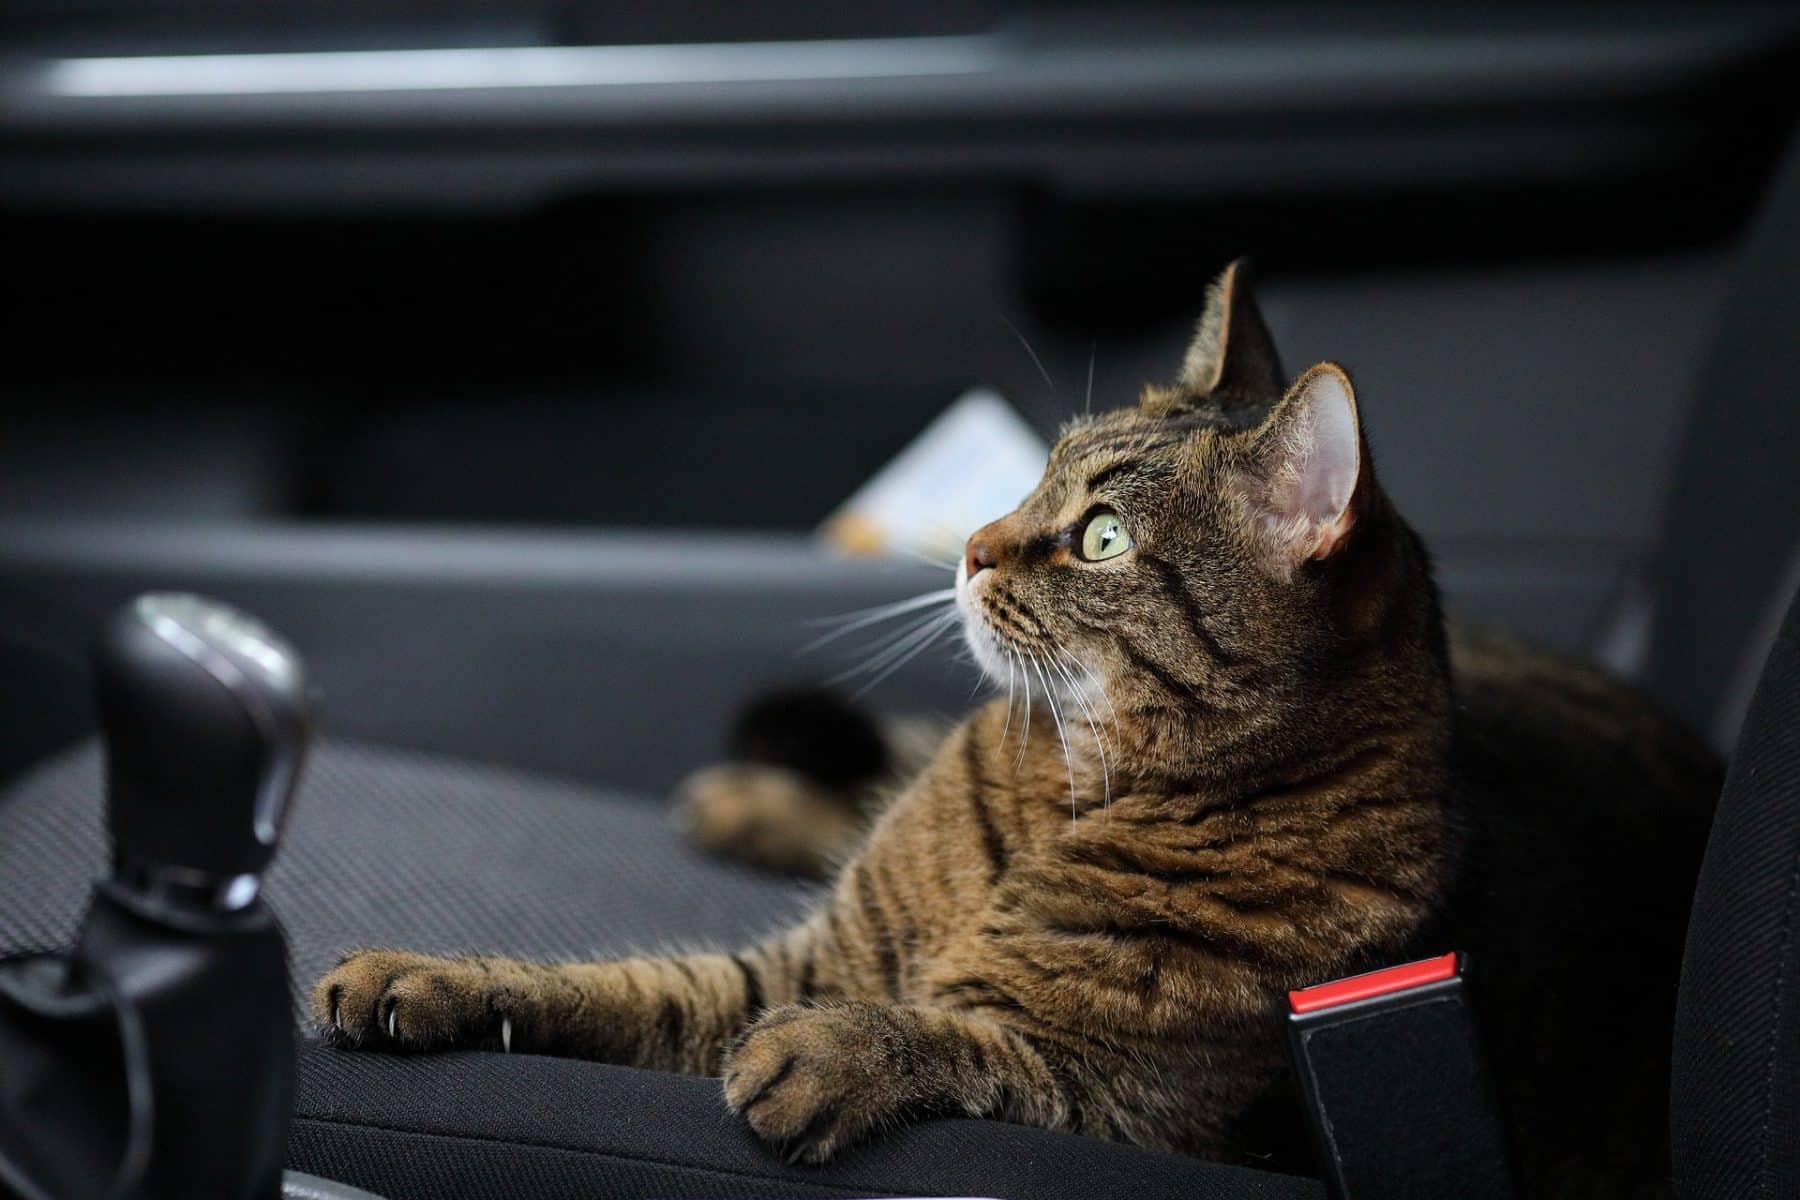 How to Travel with a Cat (As Painlessly as Possible) The Dog People